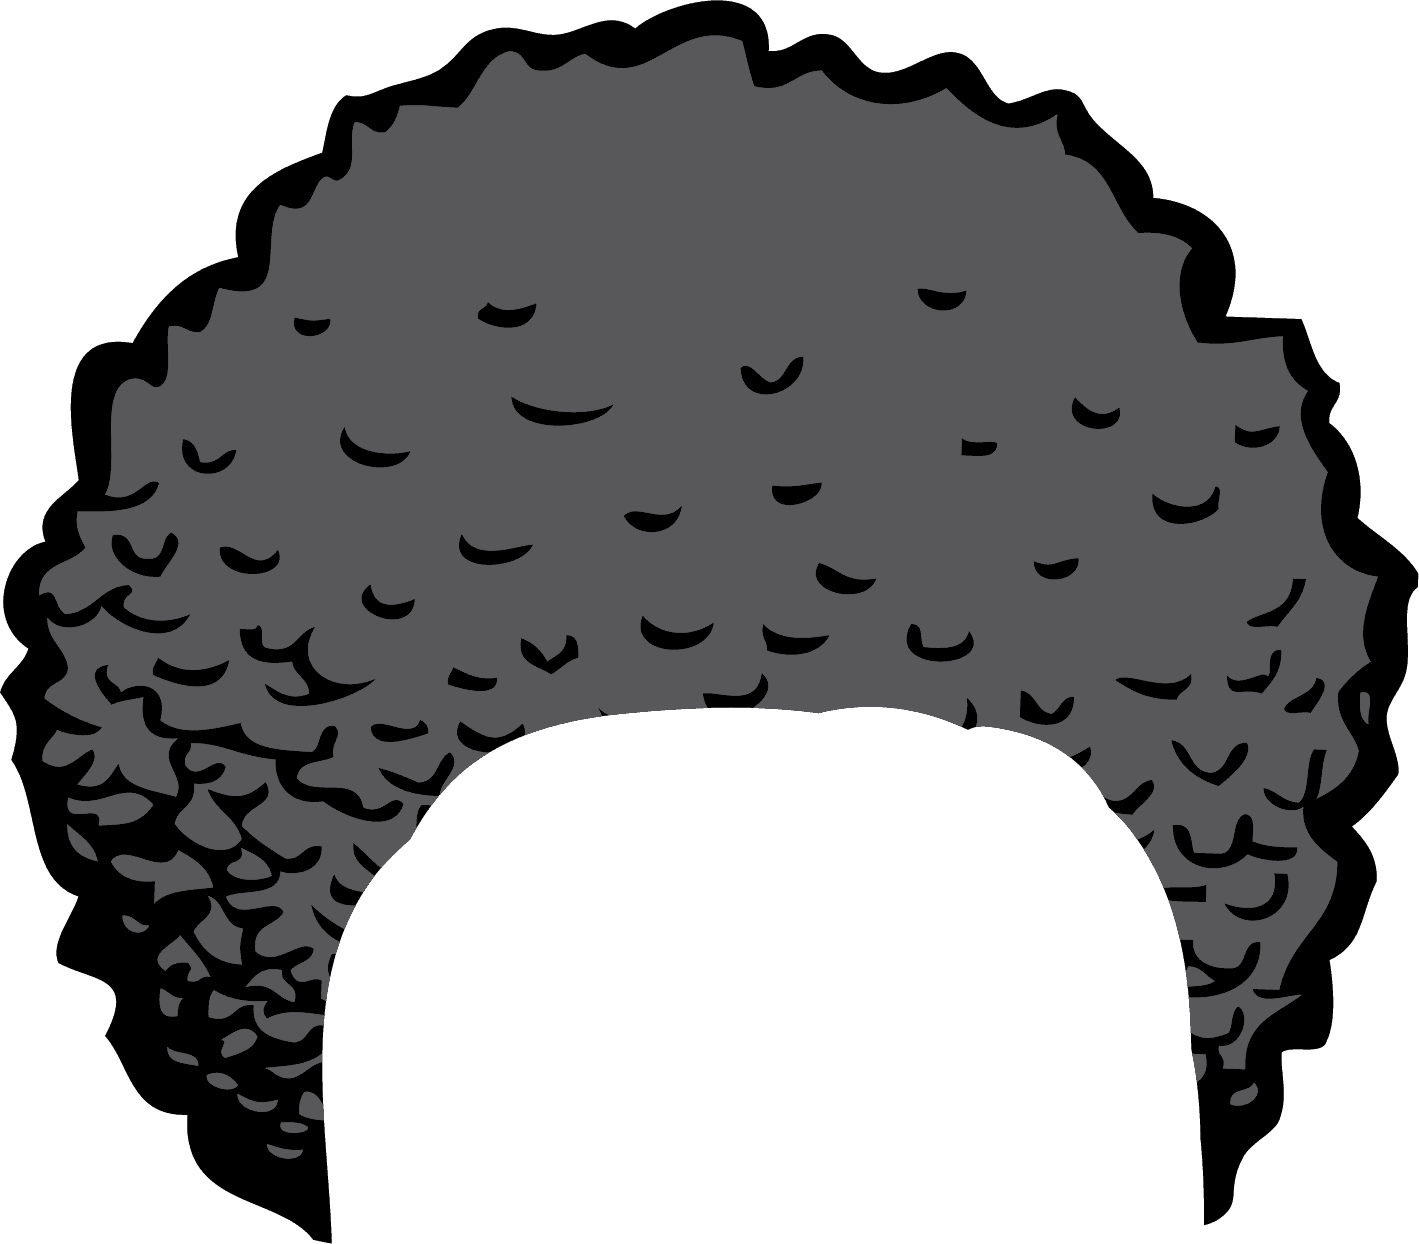 Afro Silhouette Clip Art Http//www Clipart - Free to use Clip Art ...